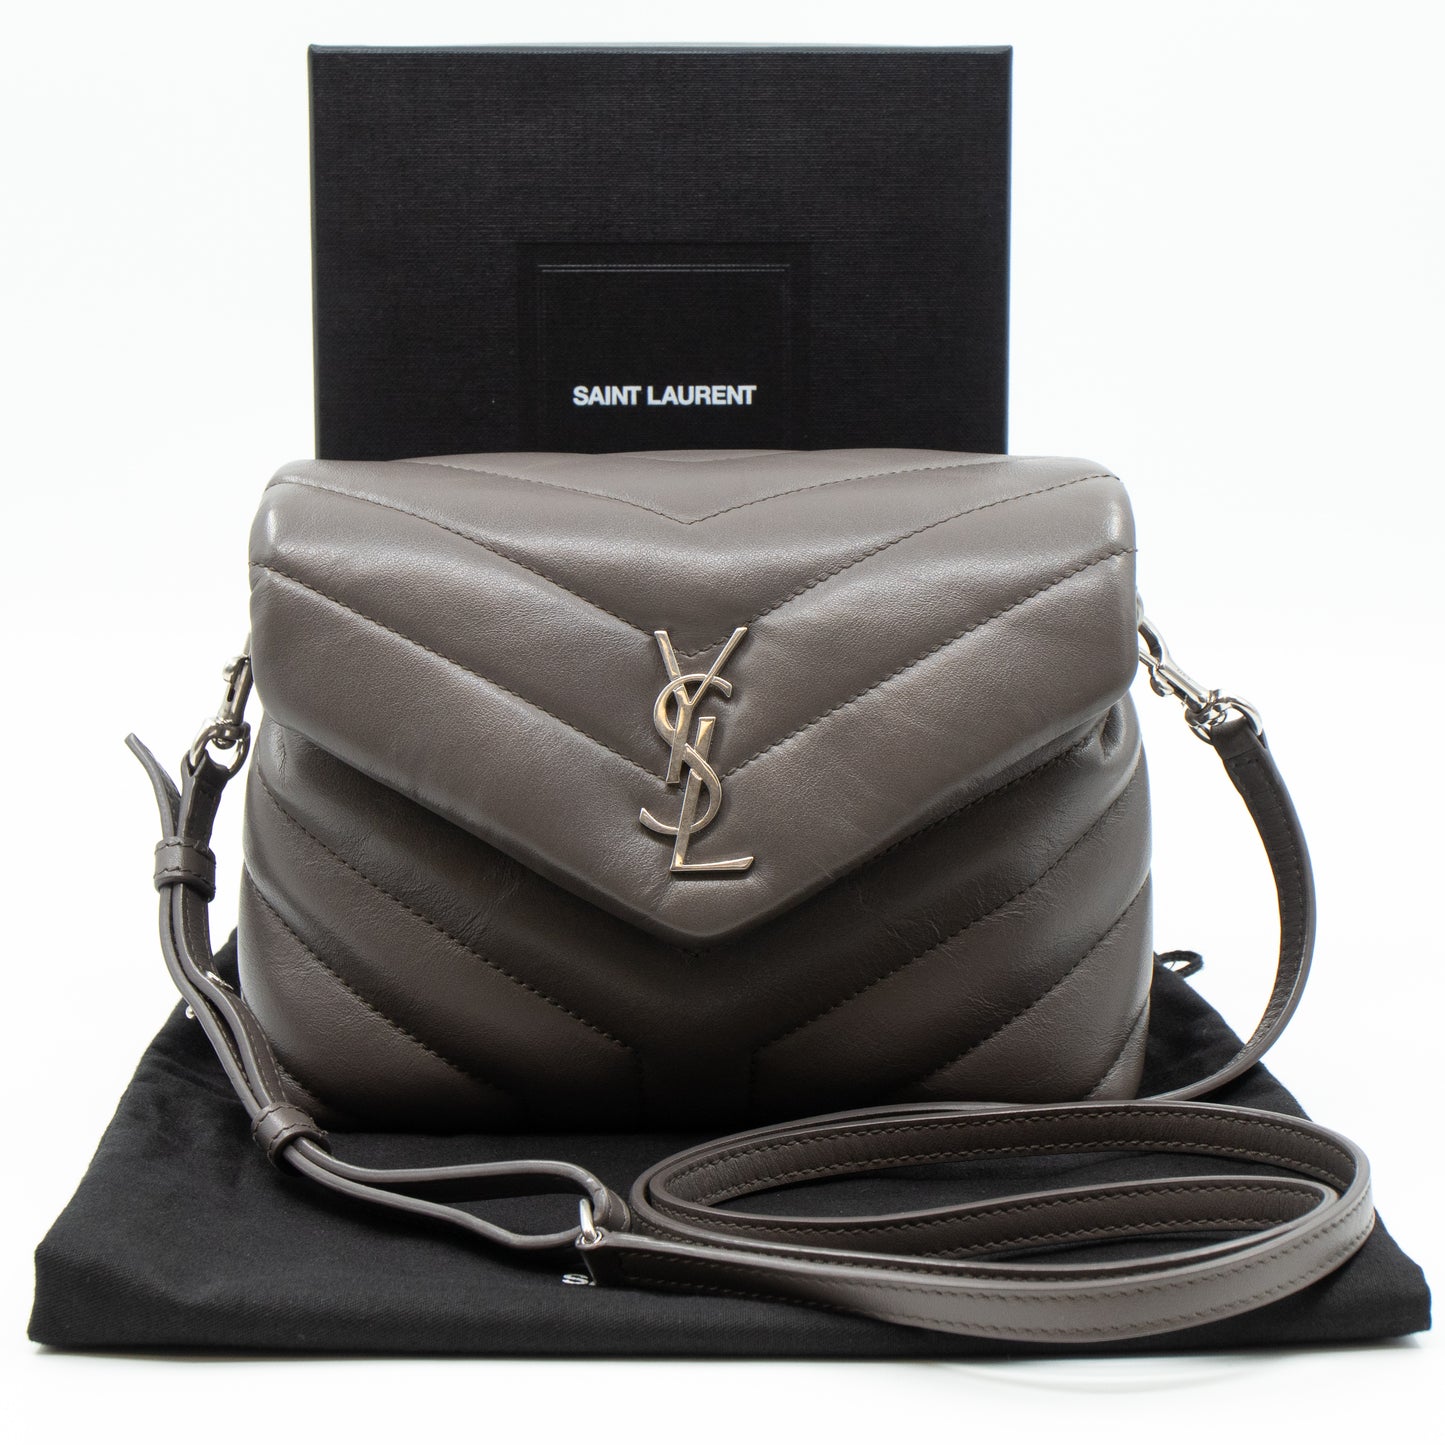 Ysl loulou large size storm grey NWT